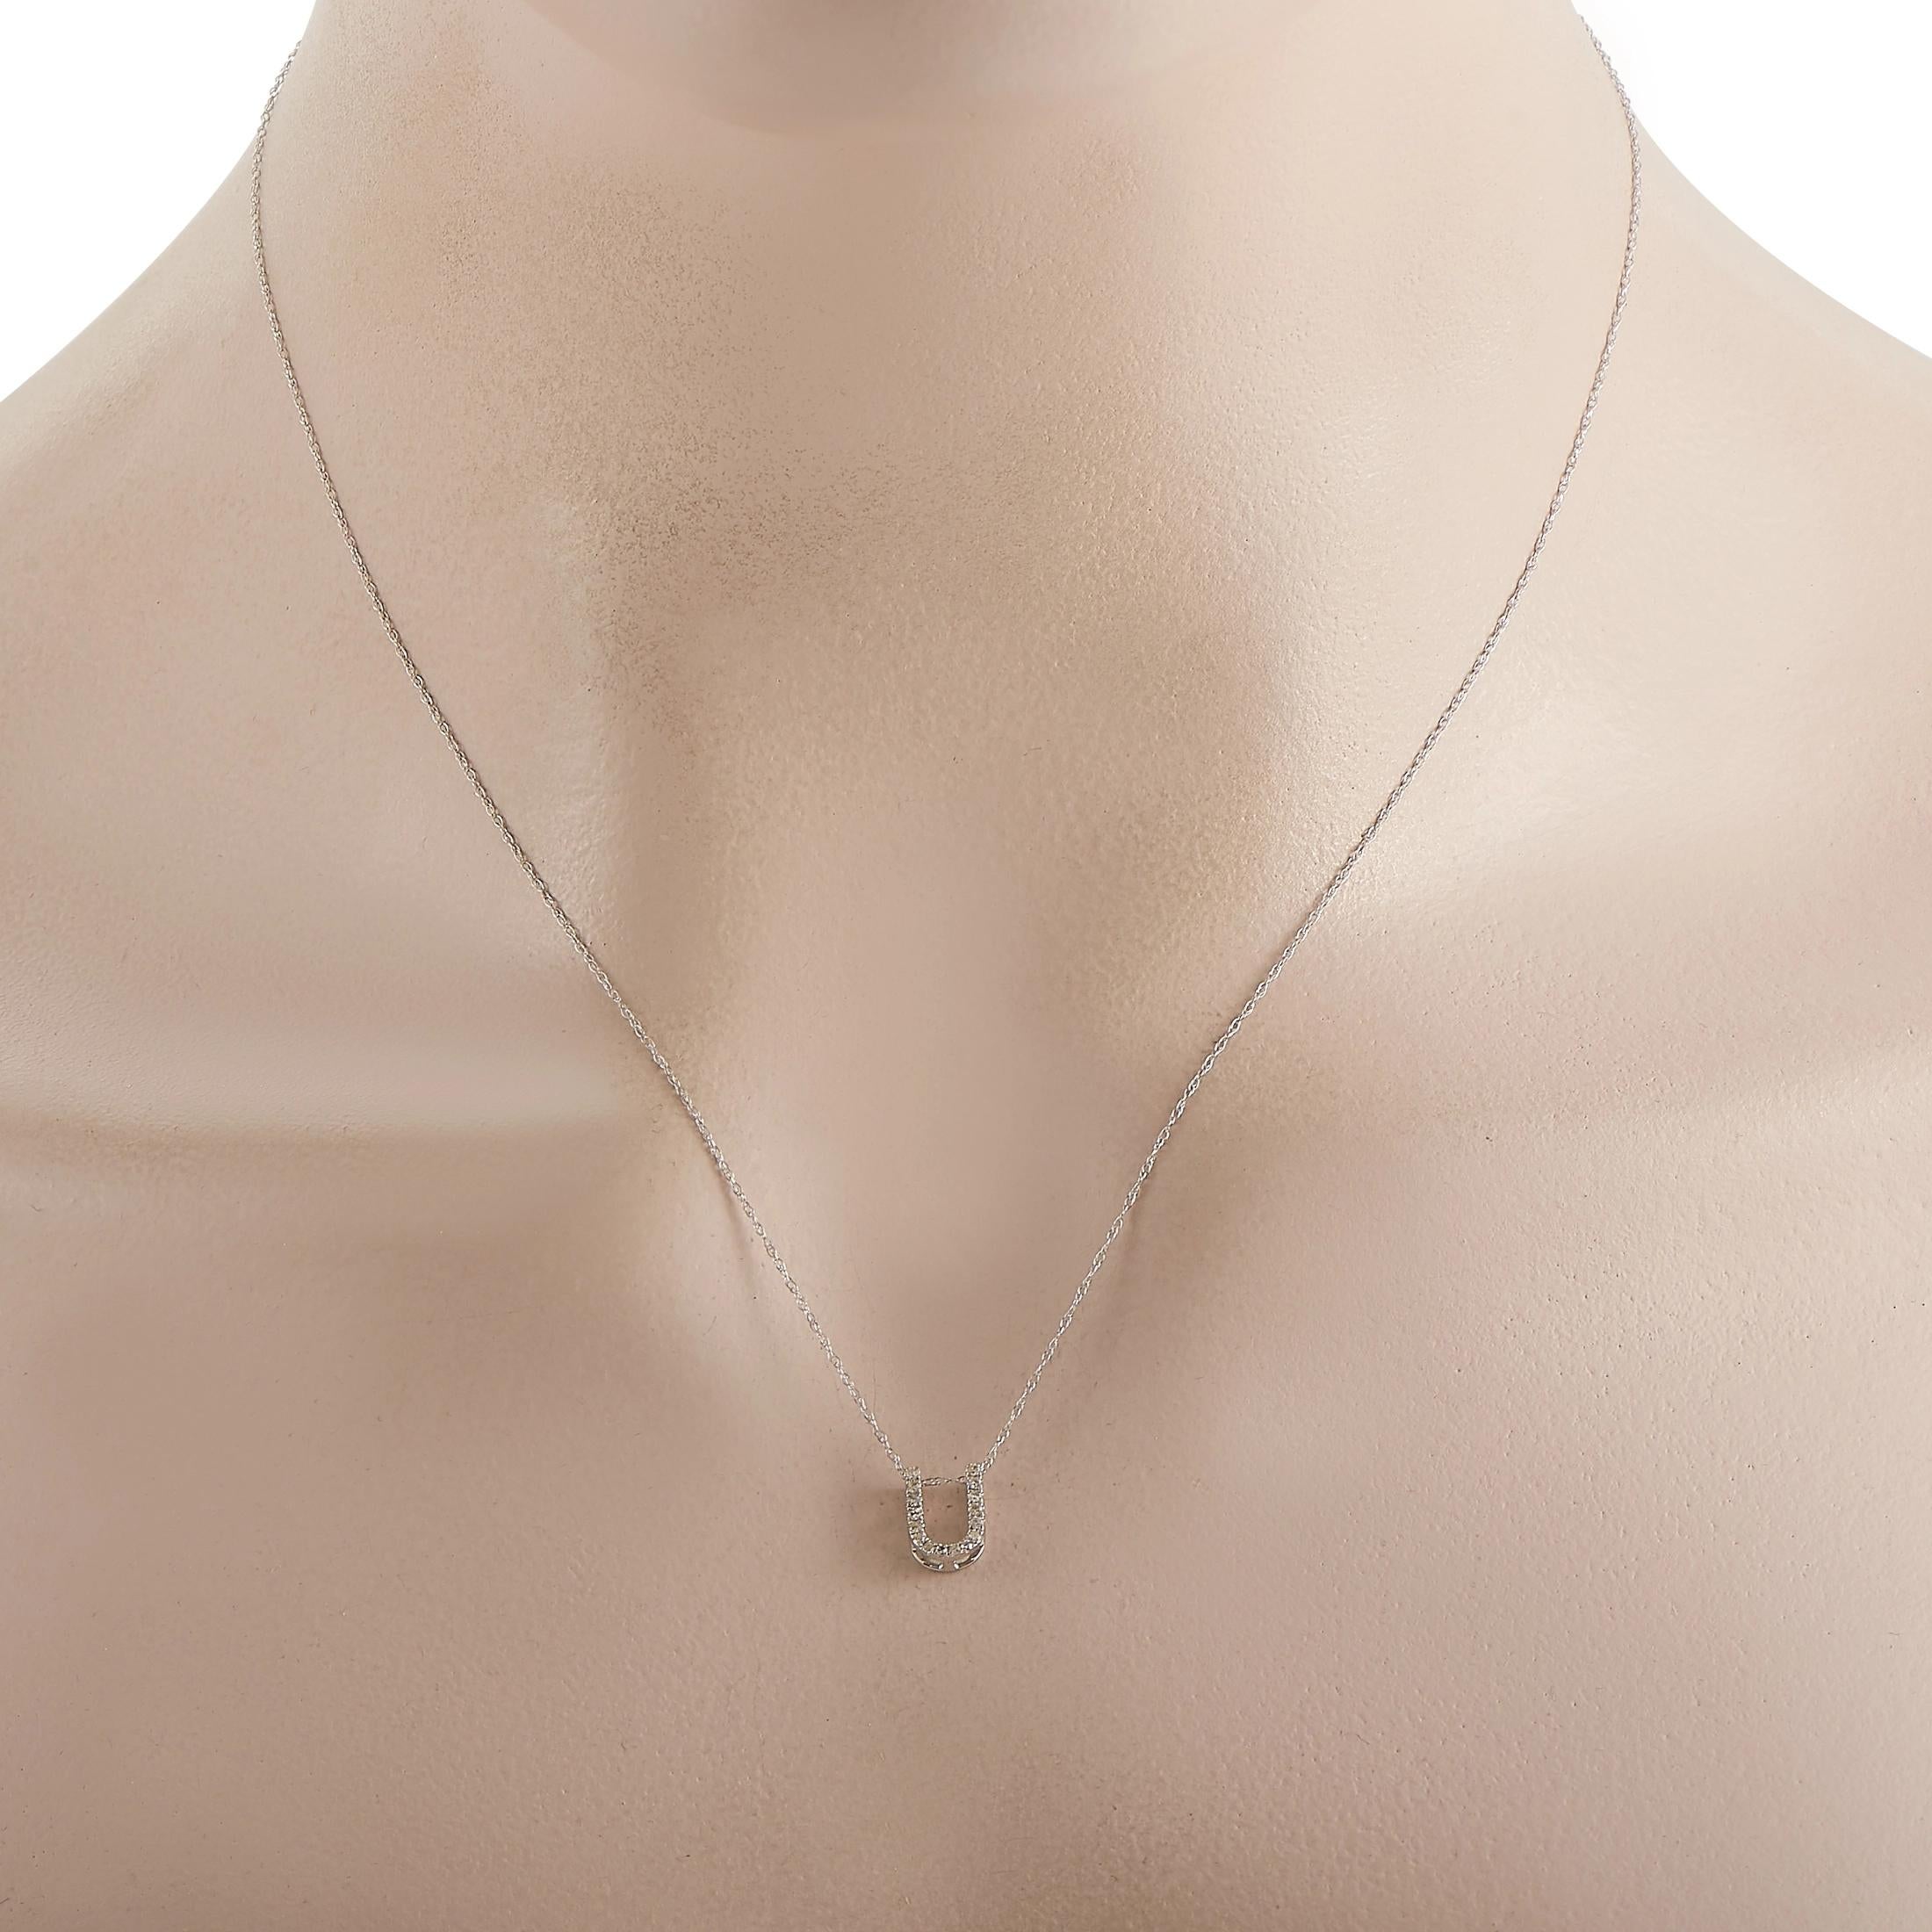 This pretty LB Exclusive 14K White Gold 0.10 ct Diamond Initial ‘U’ Necklace is made with a delicate 14K white gold chain and features a small white gold pendant shaped like the letter ‘U’ and set with 0.10 carats of round diamonds throughout. The